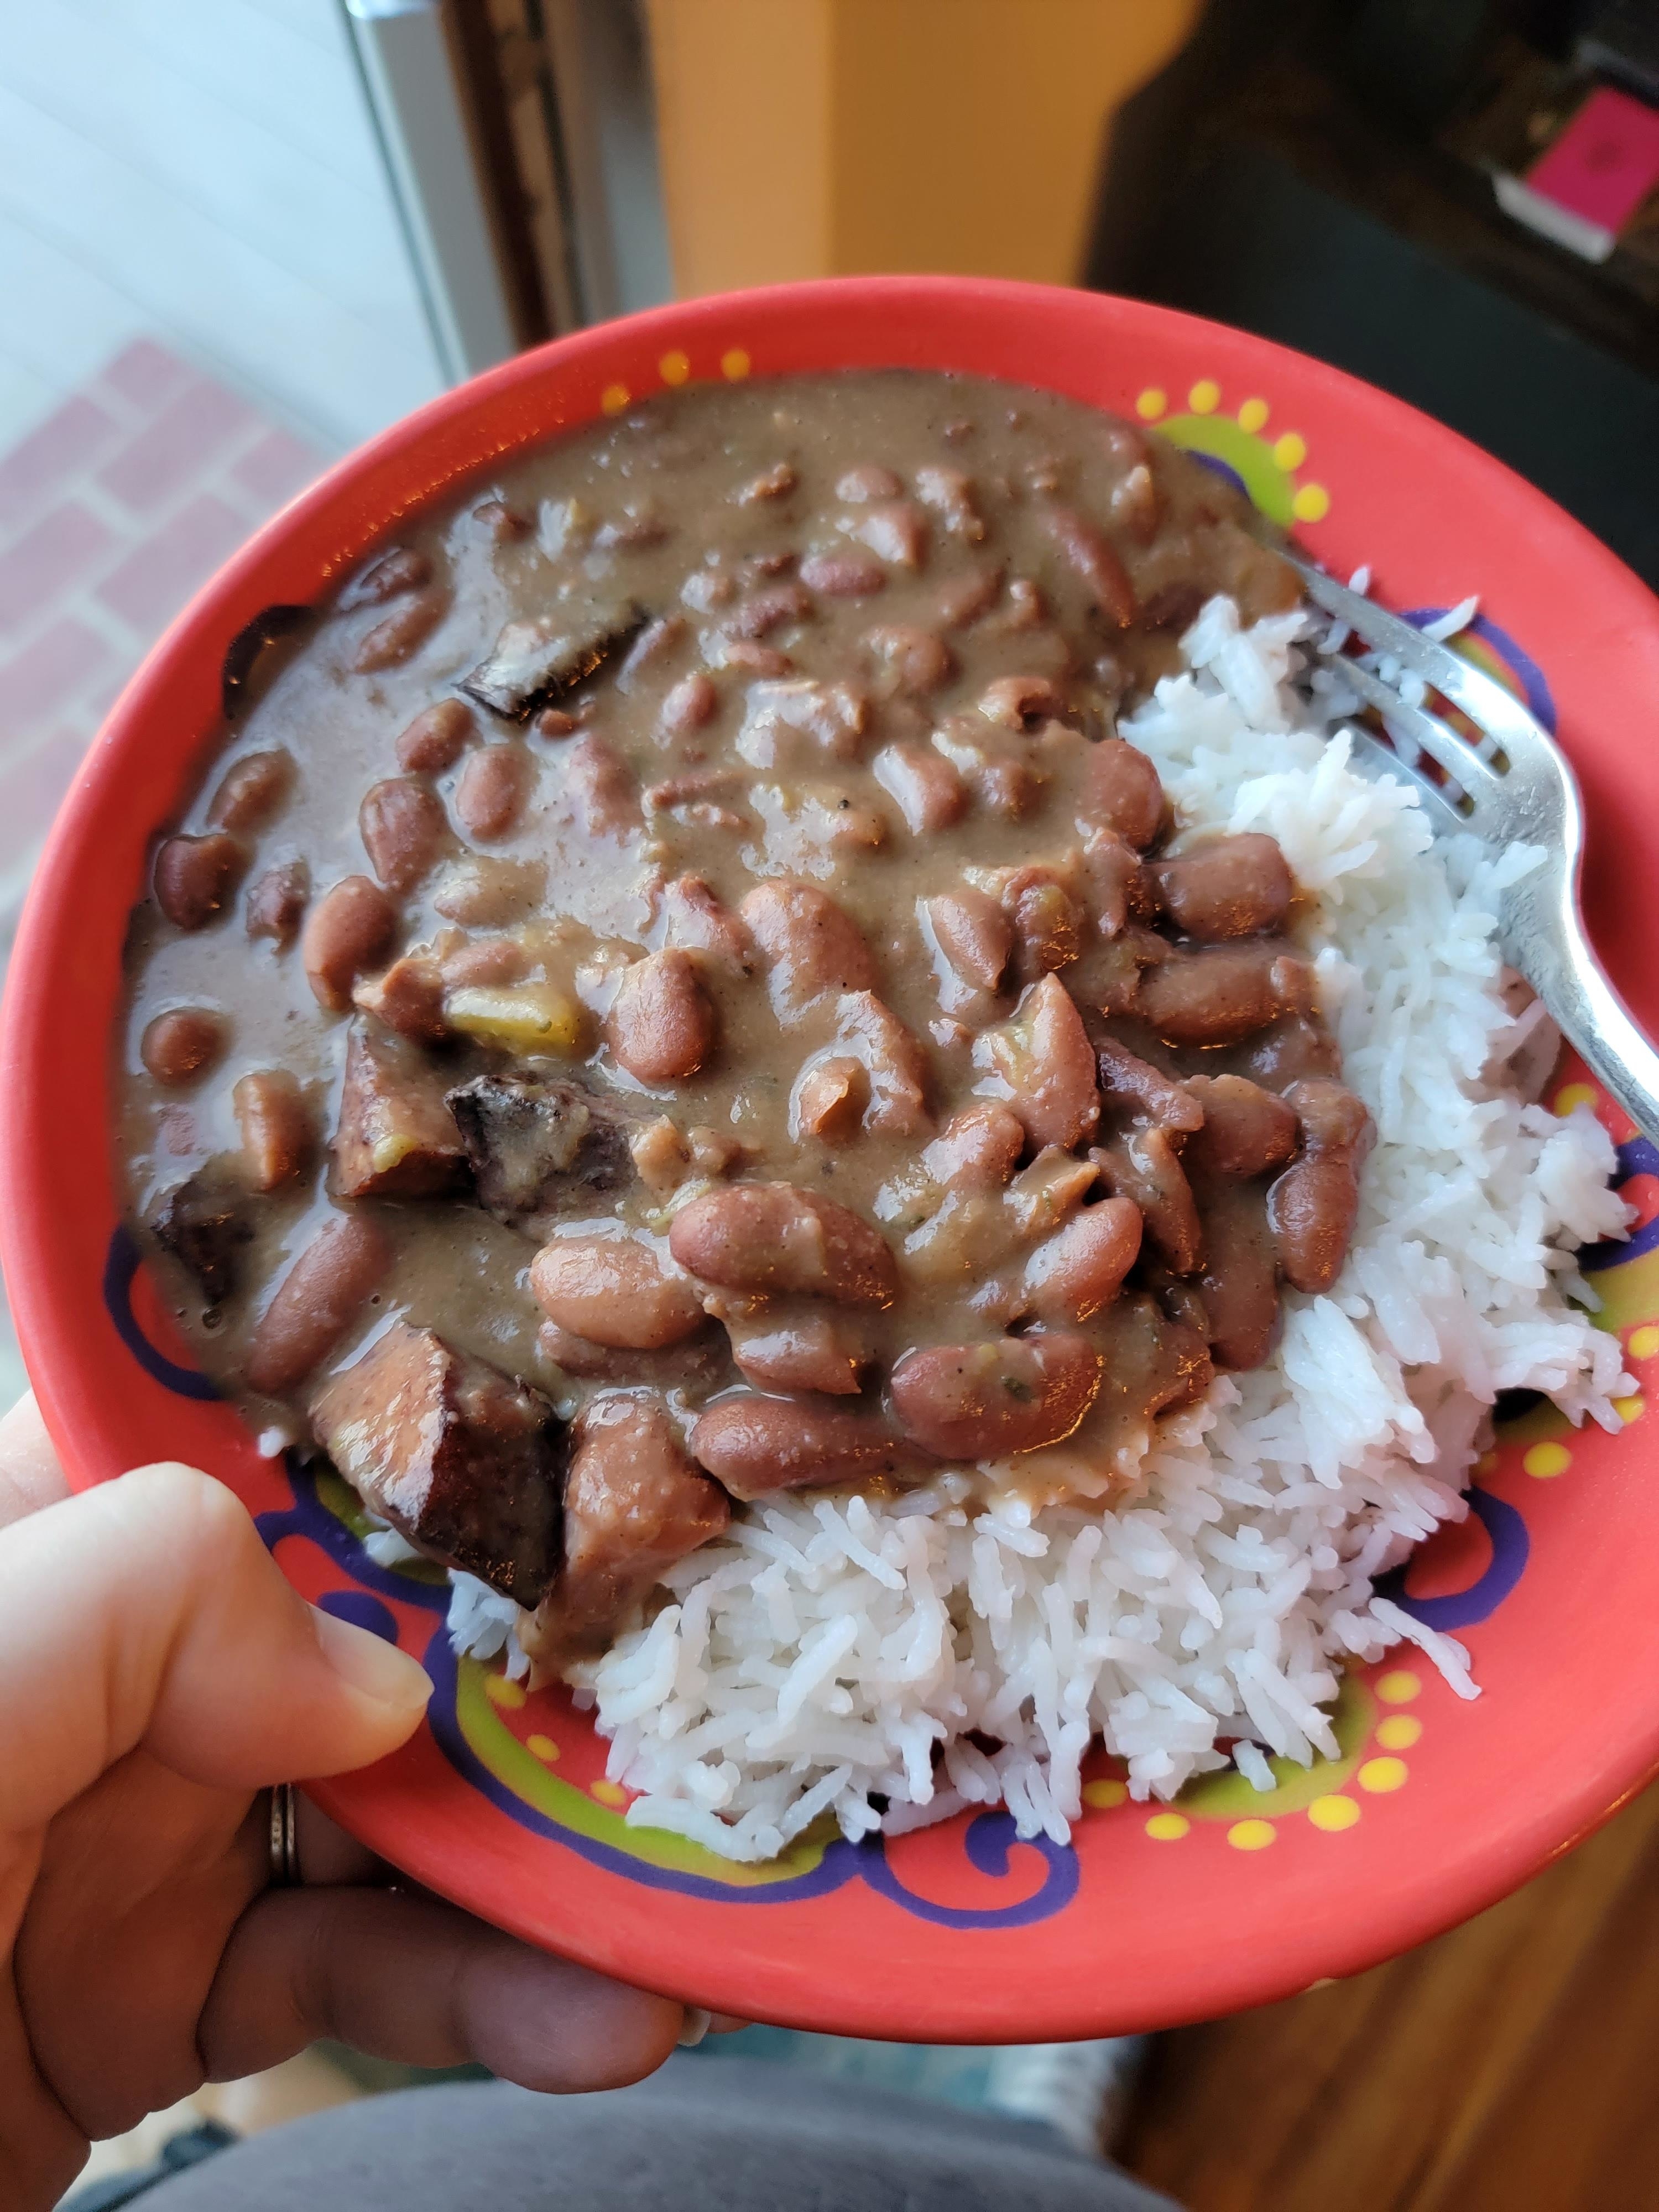 A person holding a plate with rice and beans